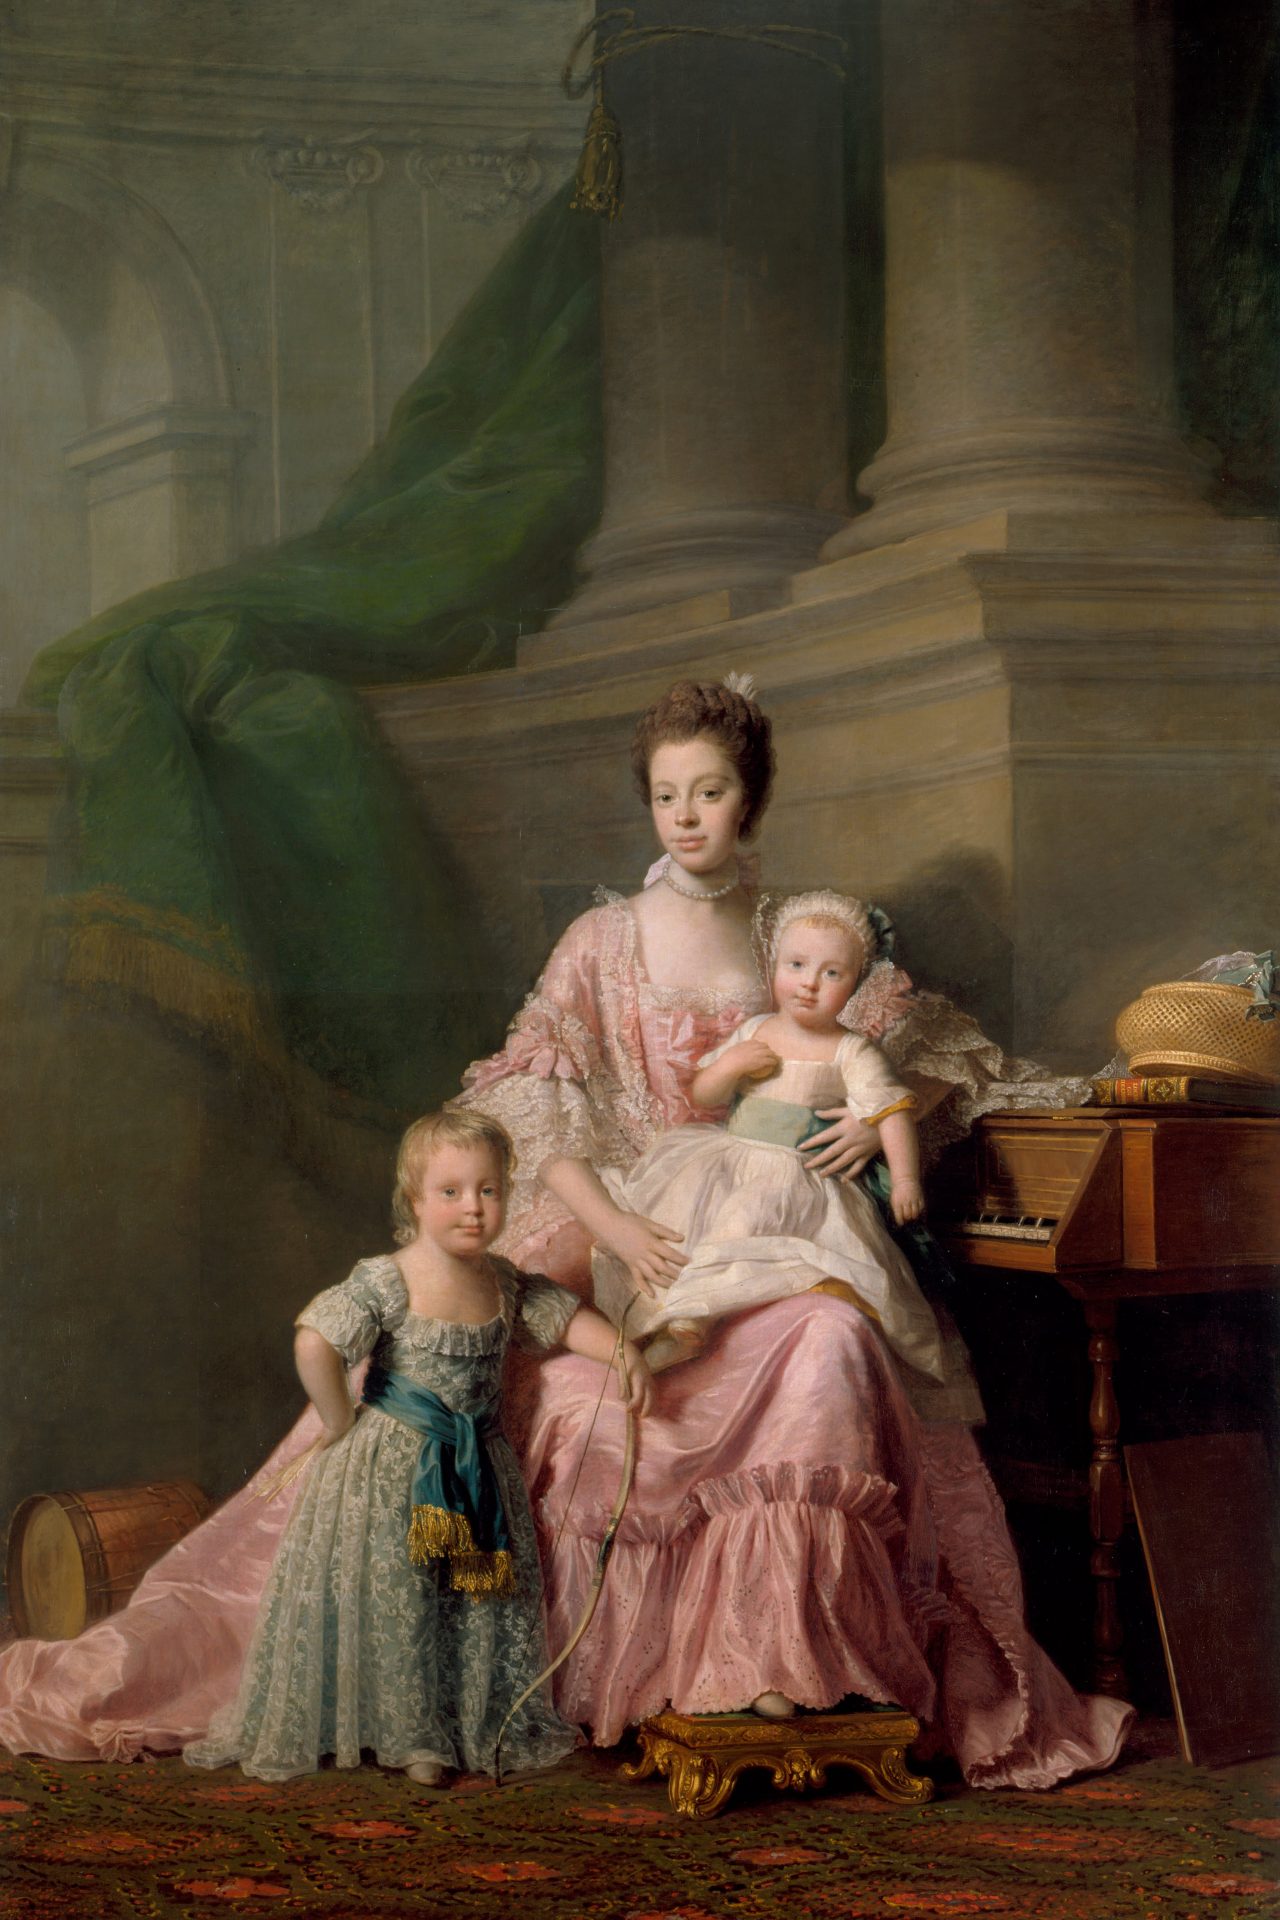 <p>When King George III's illness began, Queen Charlotte could not visit him, as his behavior was unstable and even violent. However, it did not stop Charlotte from protecting and supporting her husband throughout his life and illness, historians claim. She reportedly always remained loyal and faithful to him.</p>